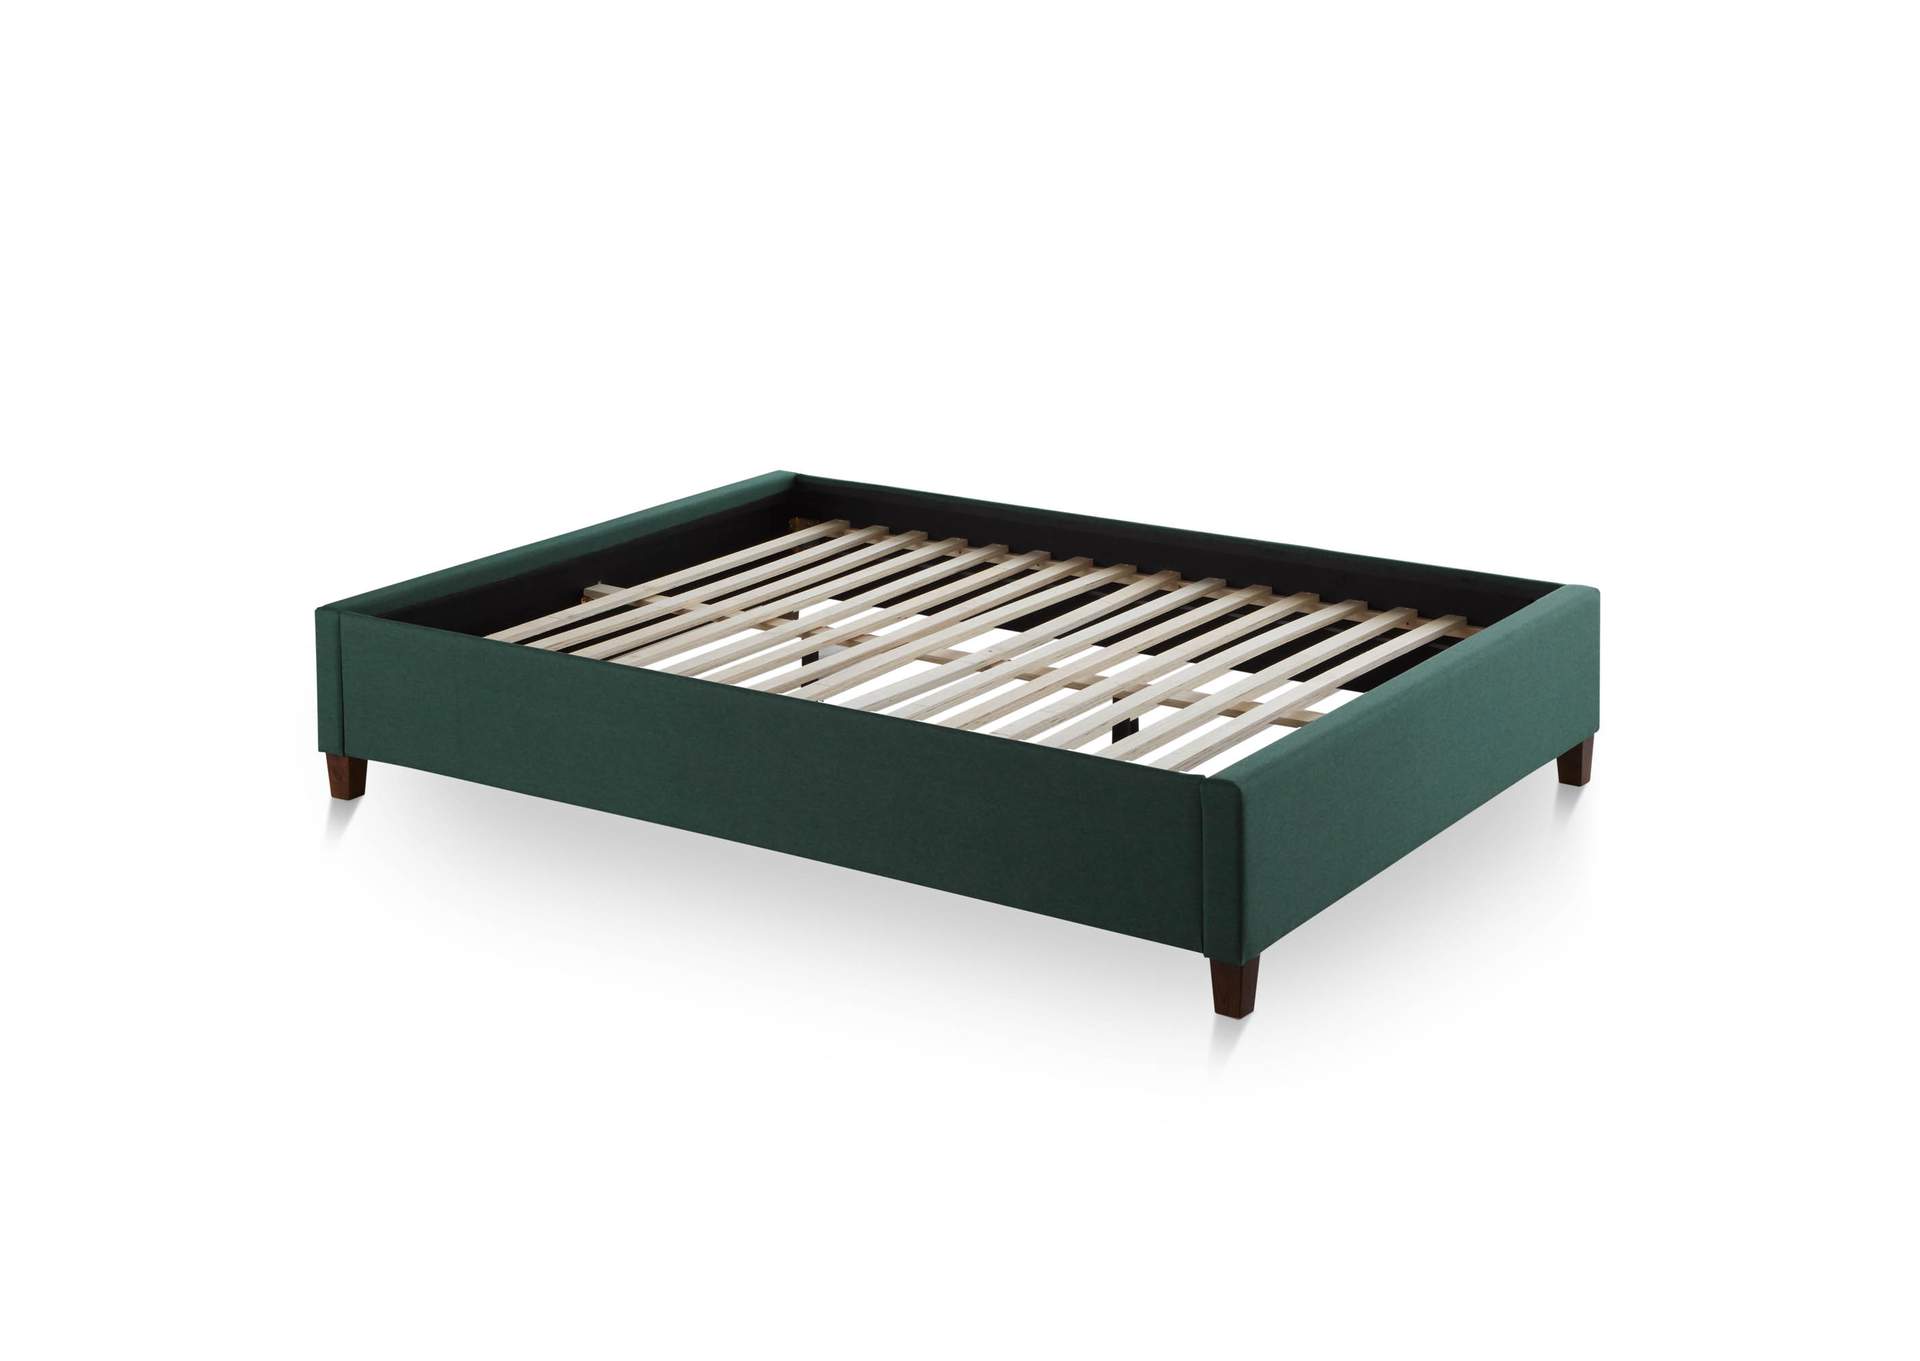 Malouf Charcoal Eastman Upholstered Platform Queen Bed,Malouf